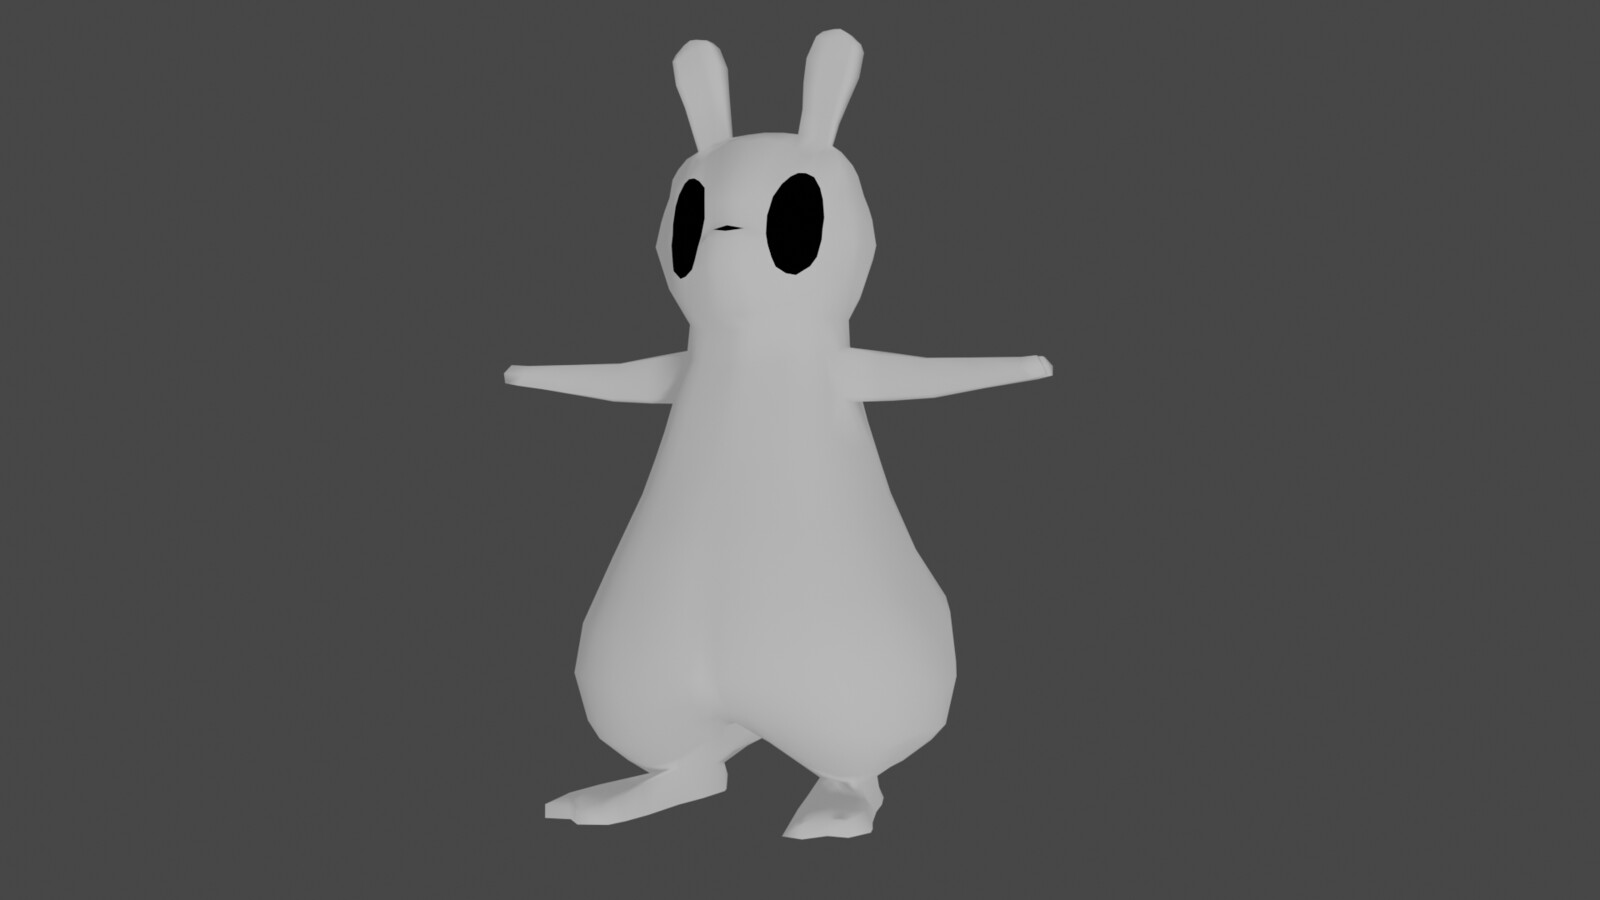 Early T-pose render without lighting or outline.